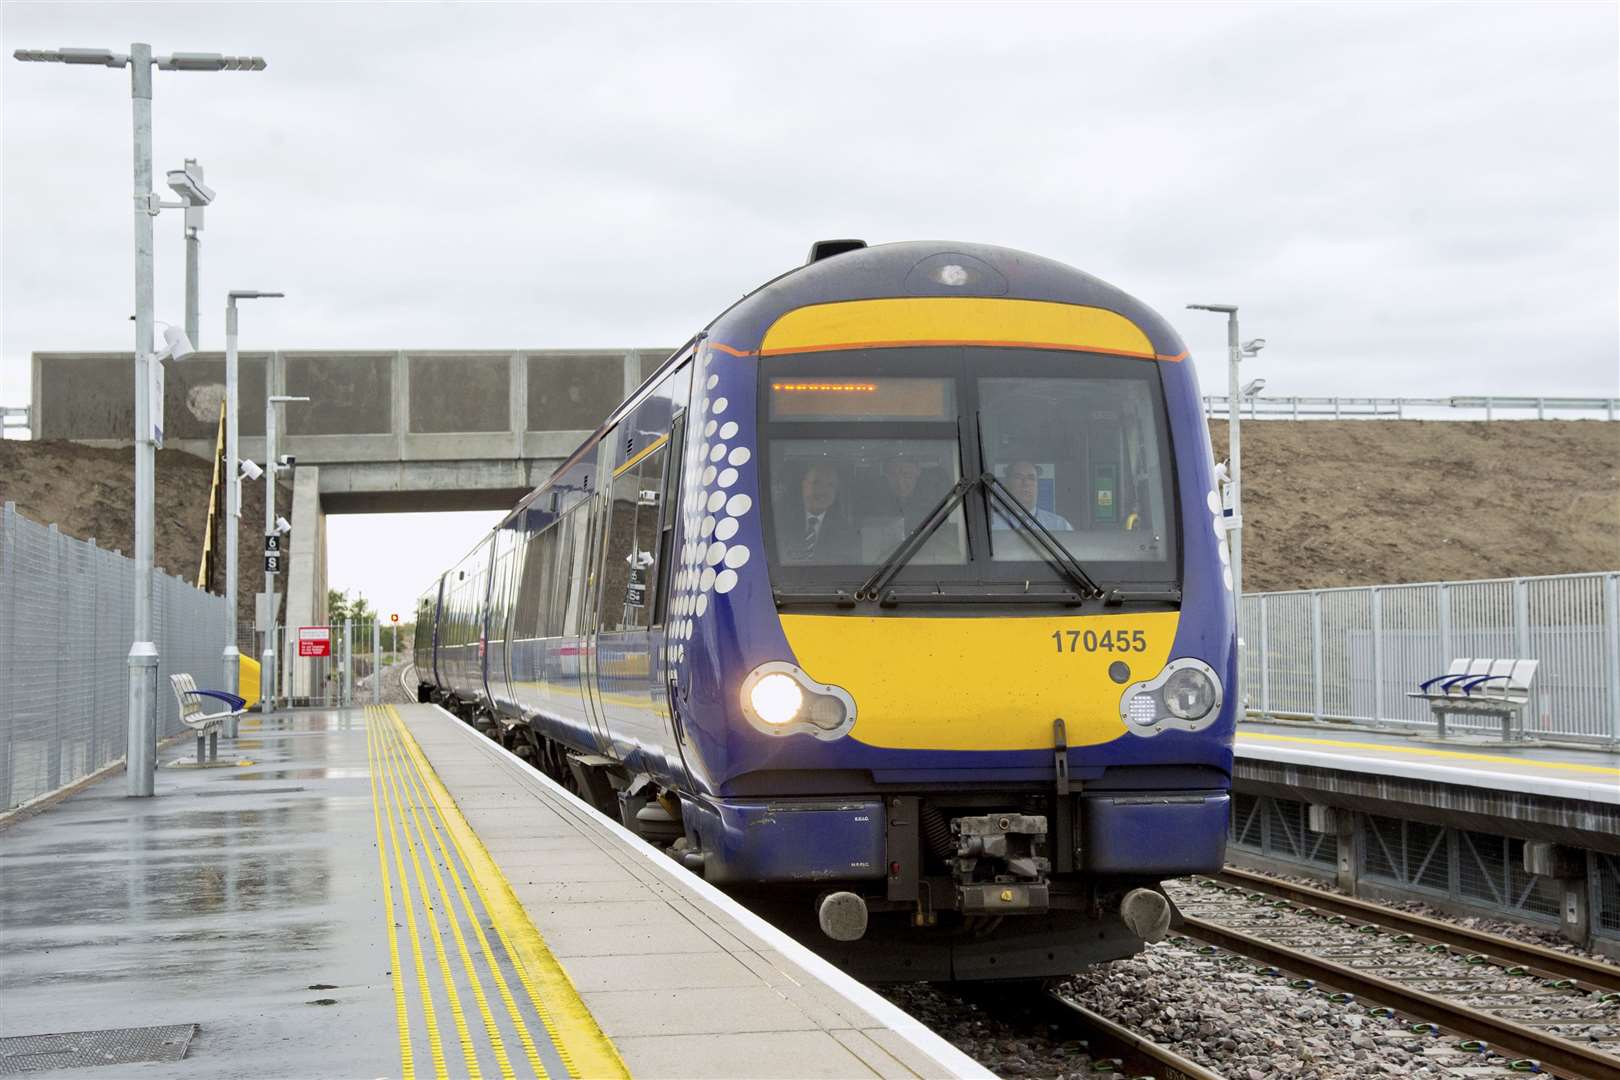 A ScotRail train on the Inverness-Aberdeen line, which is one of the affected routes. Picture: Daniel Forsyth. Image No.039367.